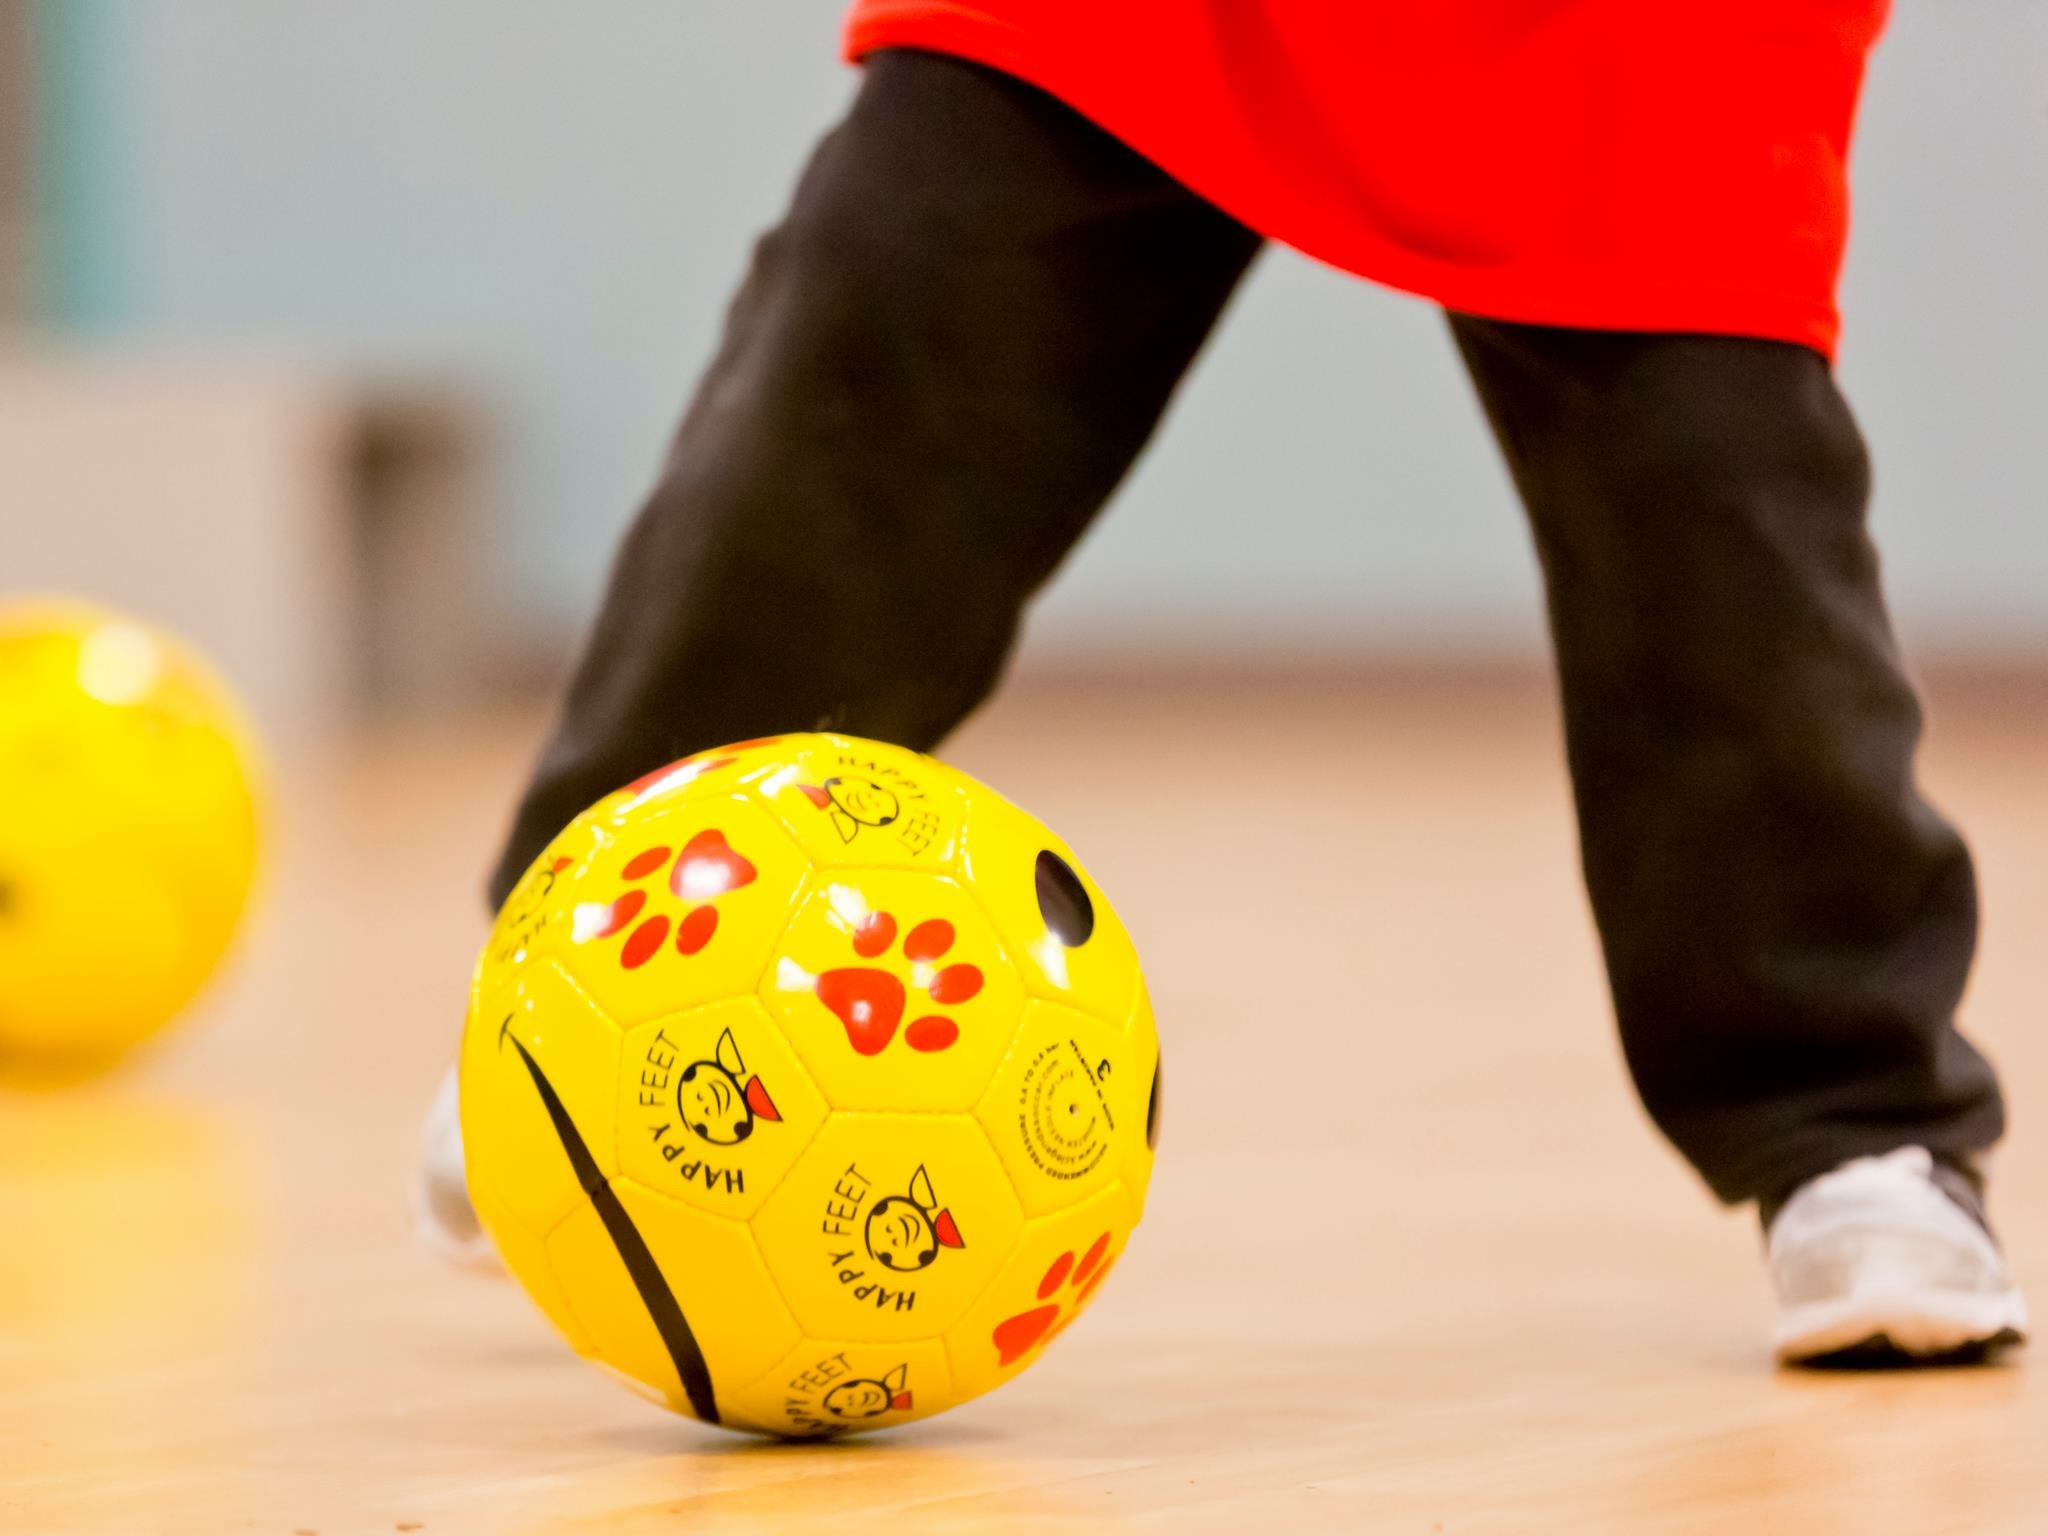   Soccer Fun For Your Little One!   Learn More   Our Approach  